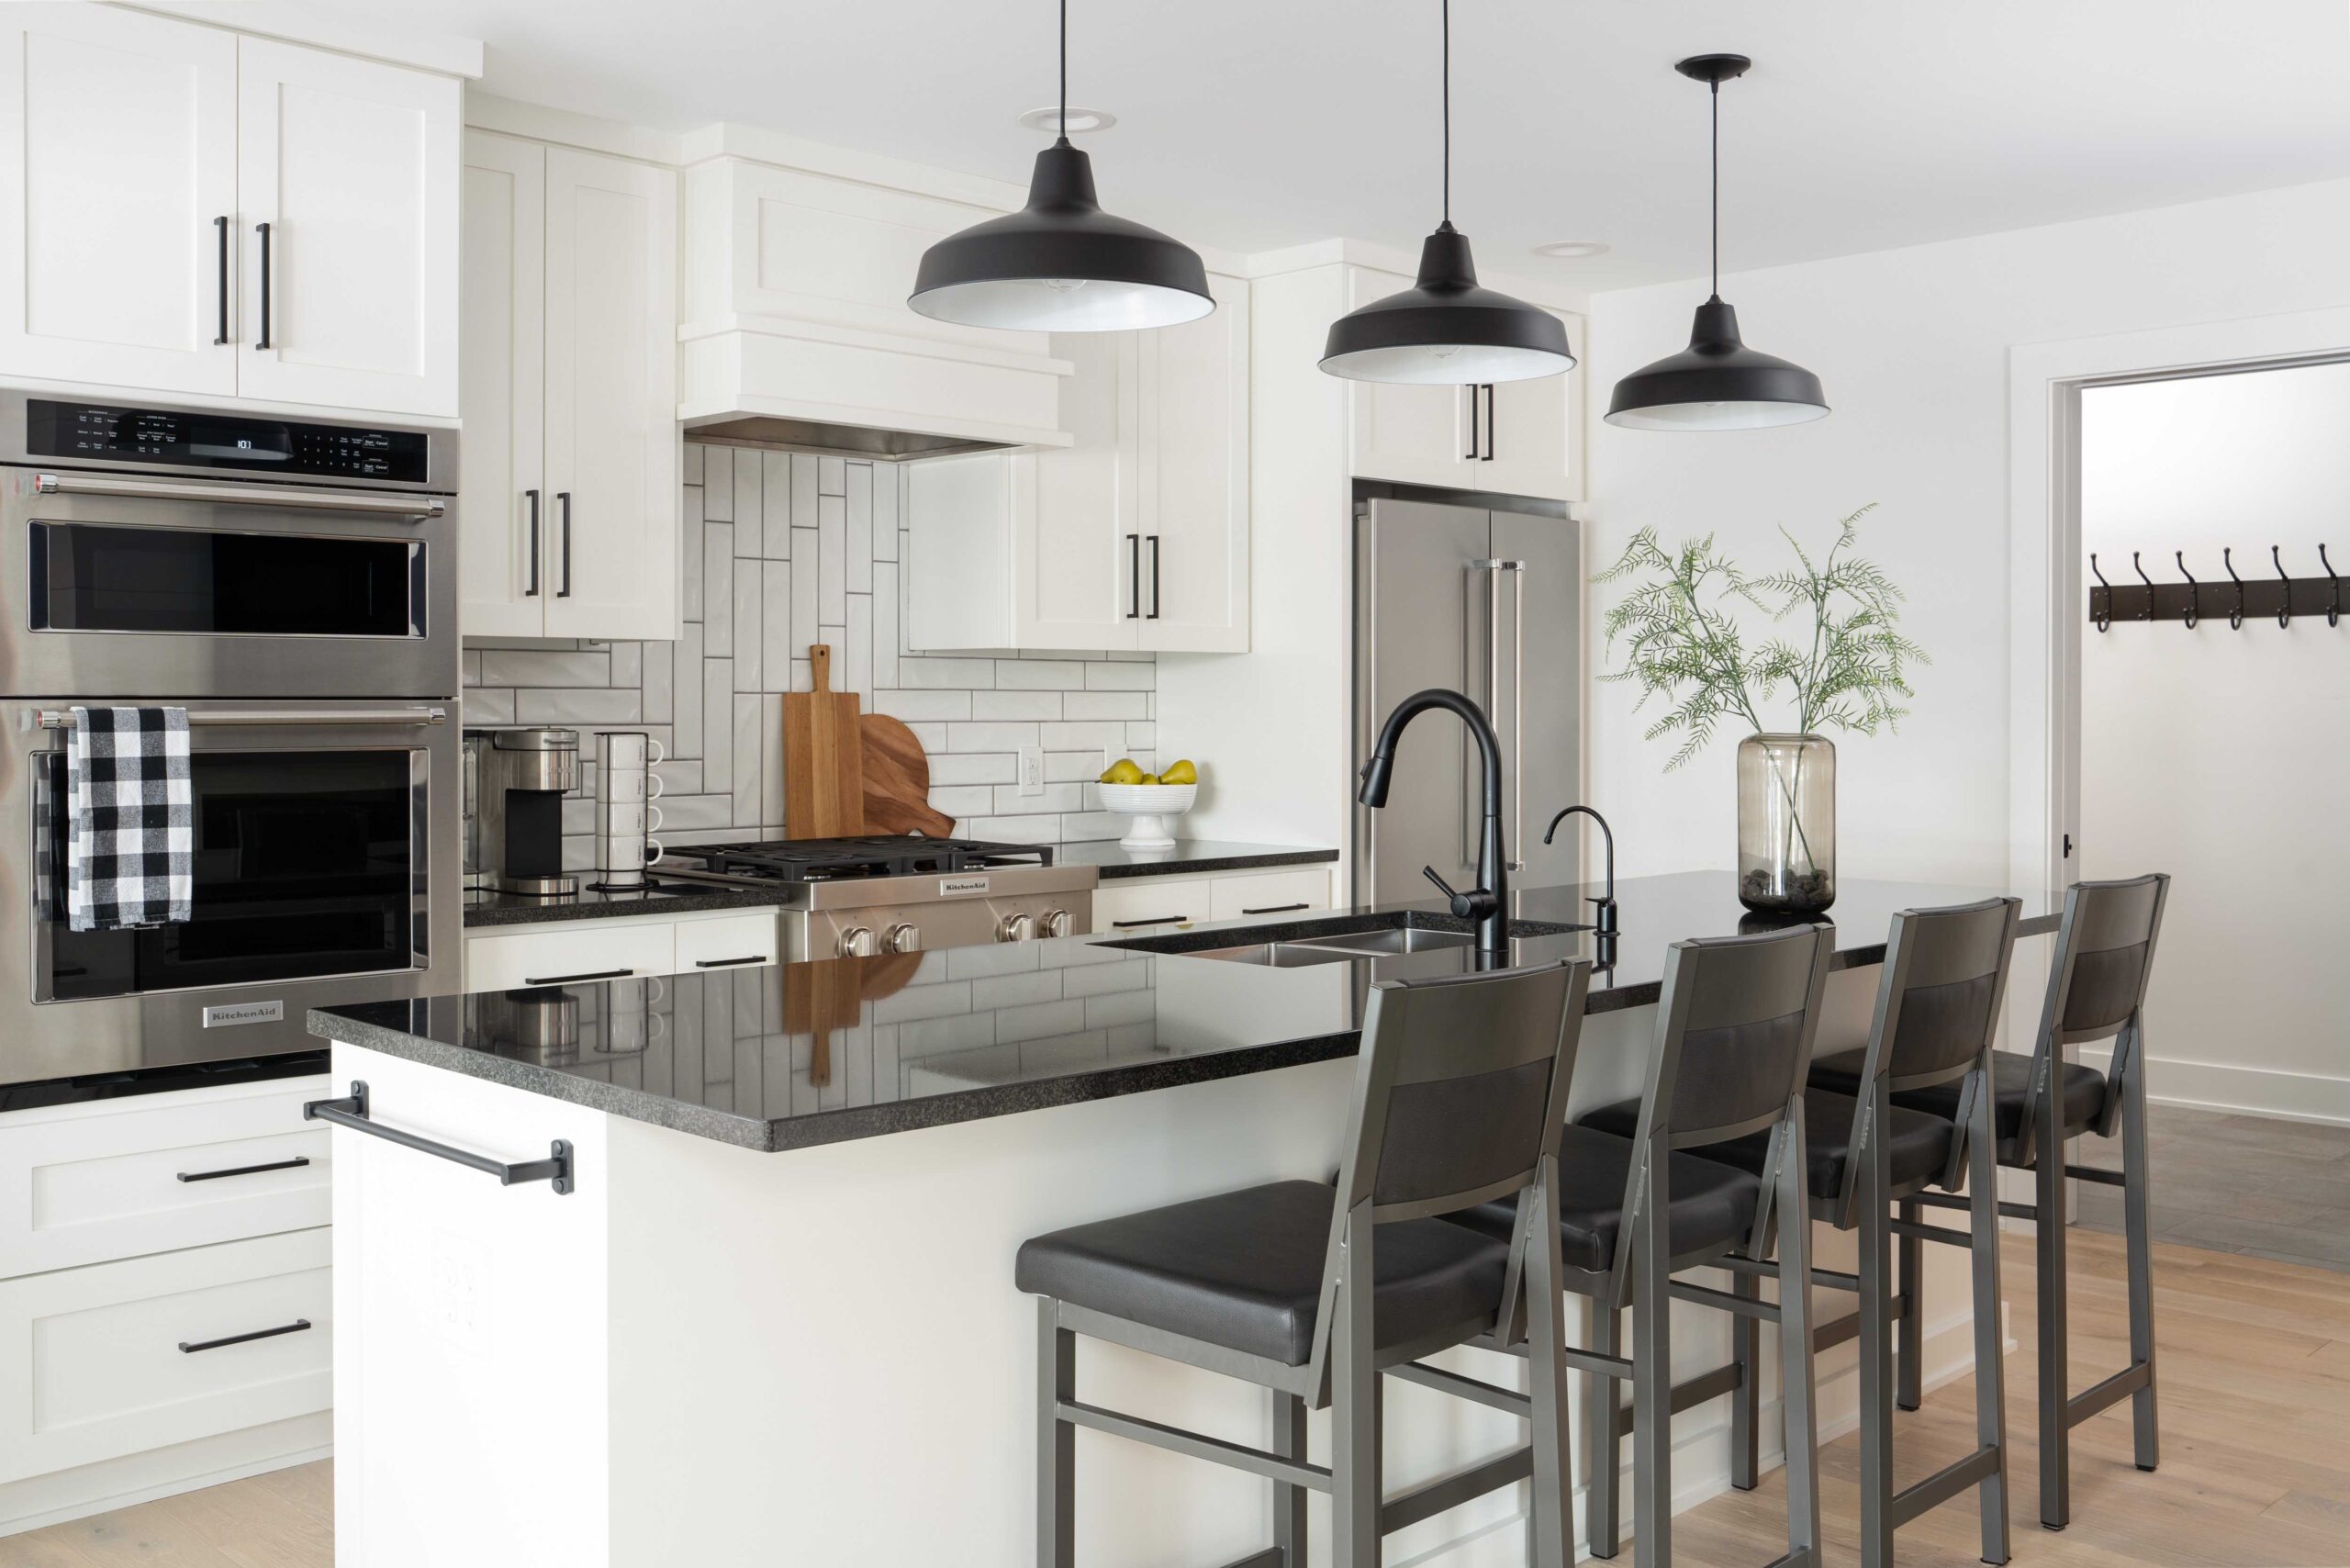 An Orchard Lake remodel with a white kitchen featuring black counter tops and stainless steel appliances.